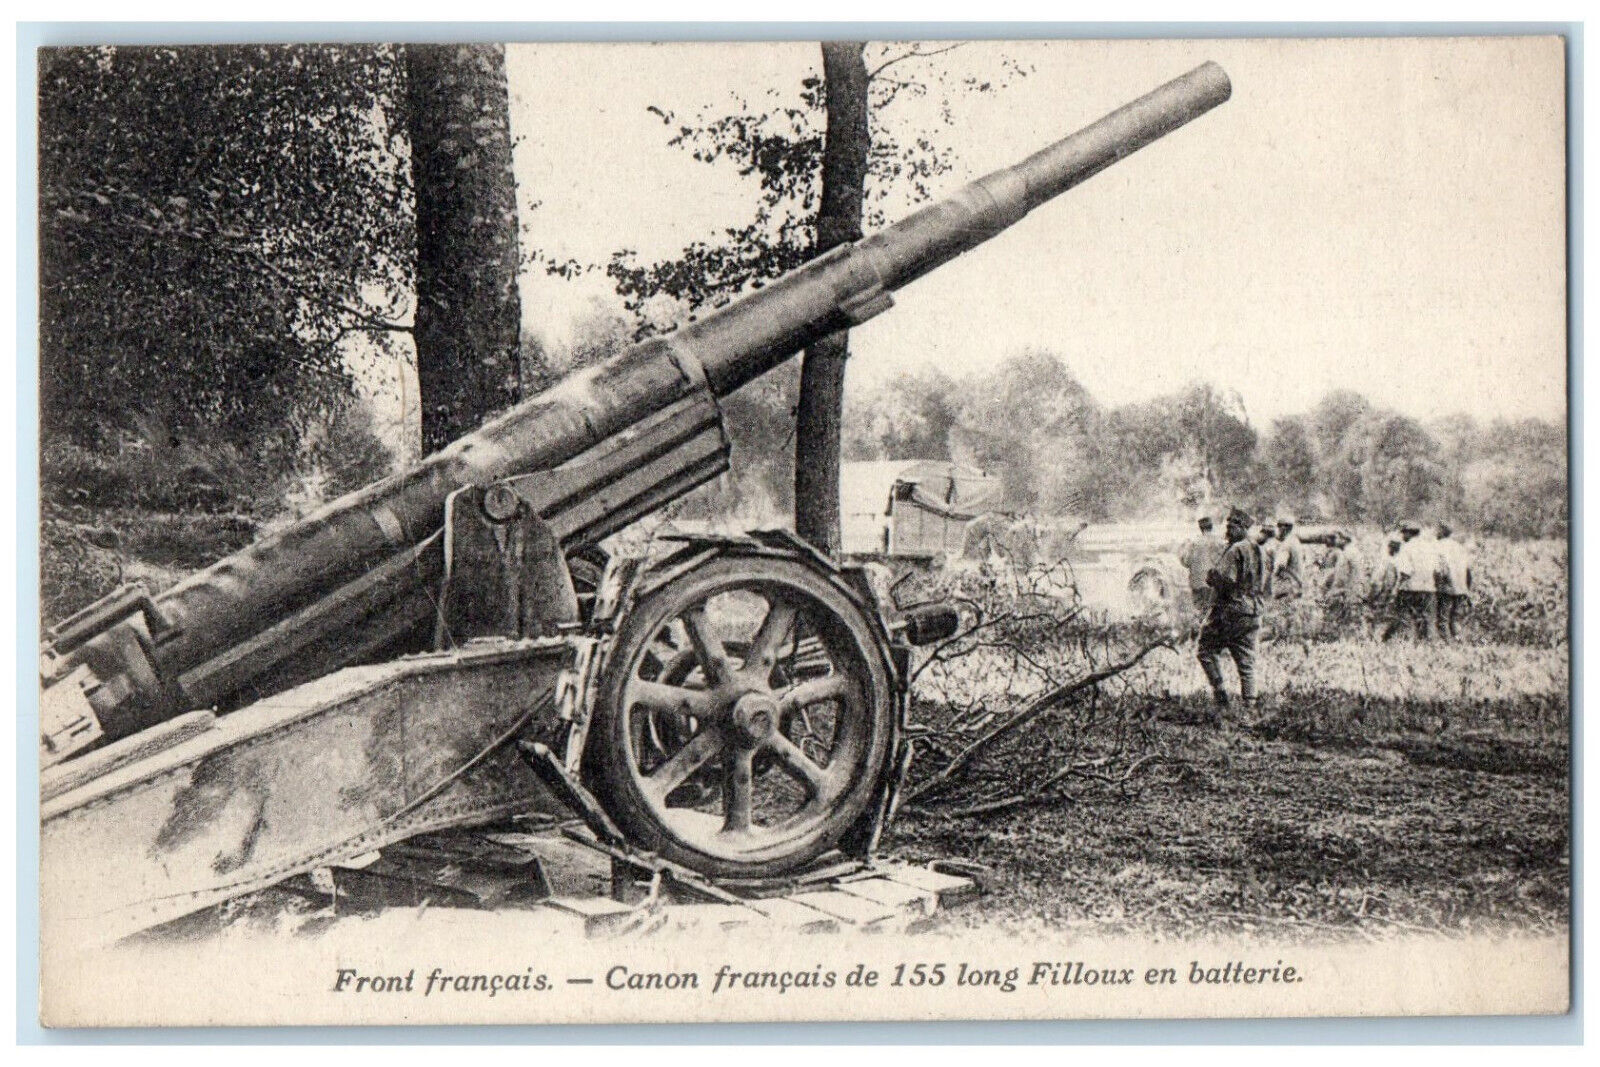 c1910 French Front French Cannon Of 155 Long Filloux In Battery WW1 Postcard